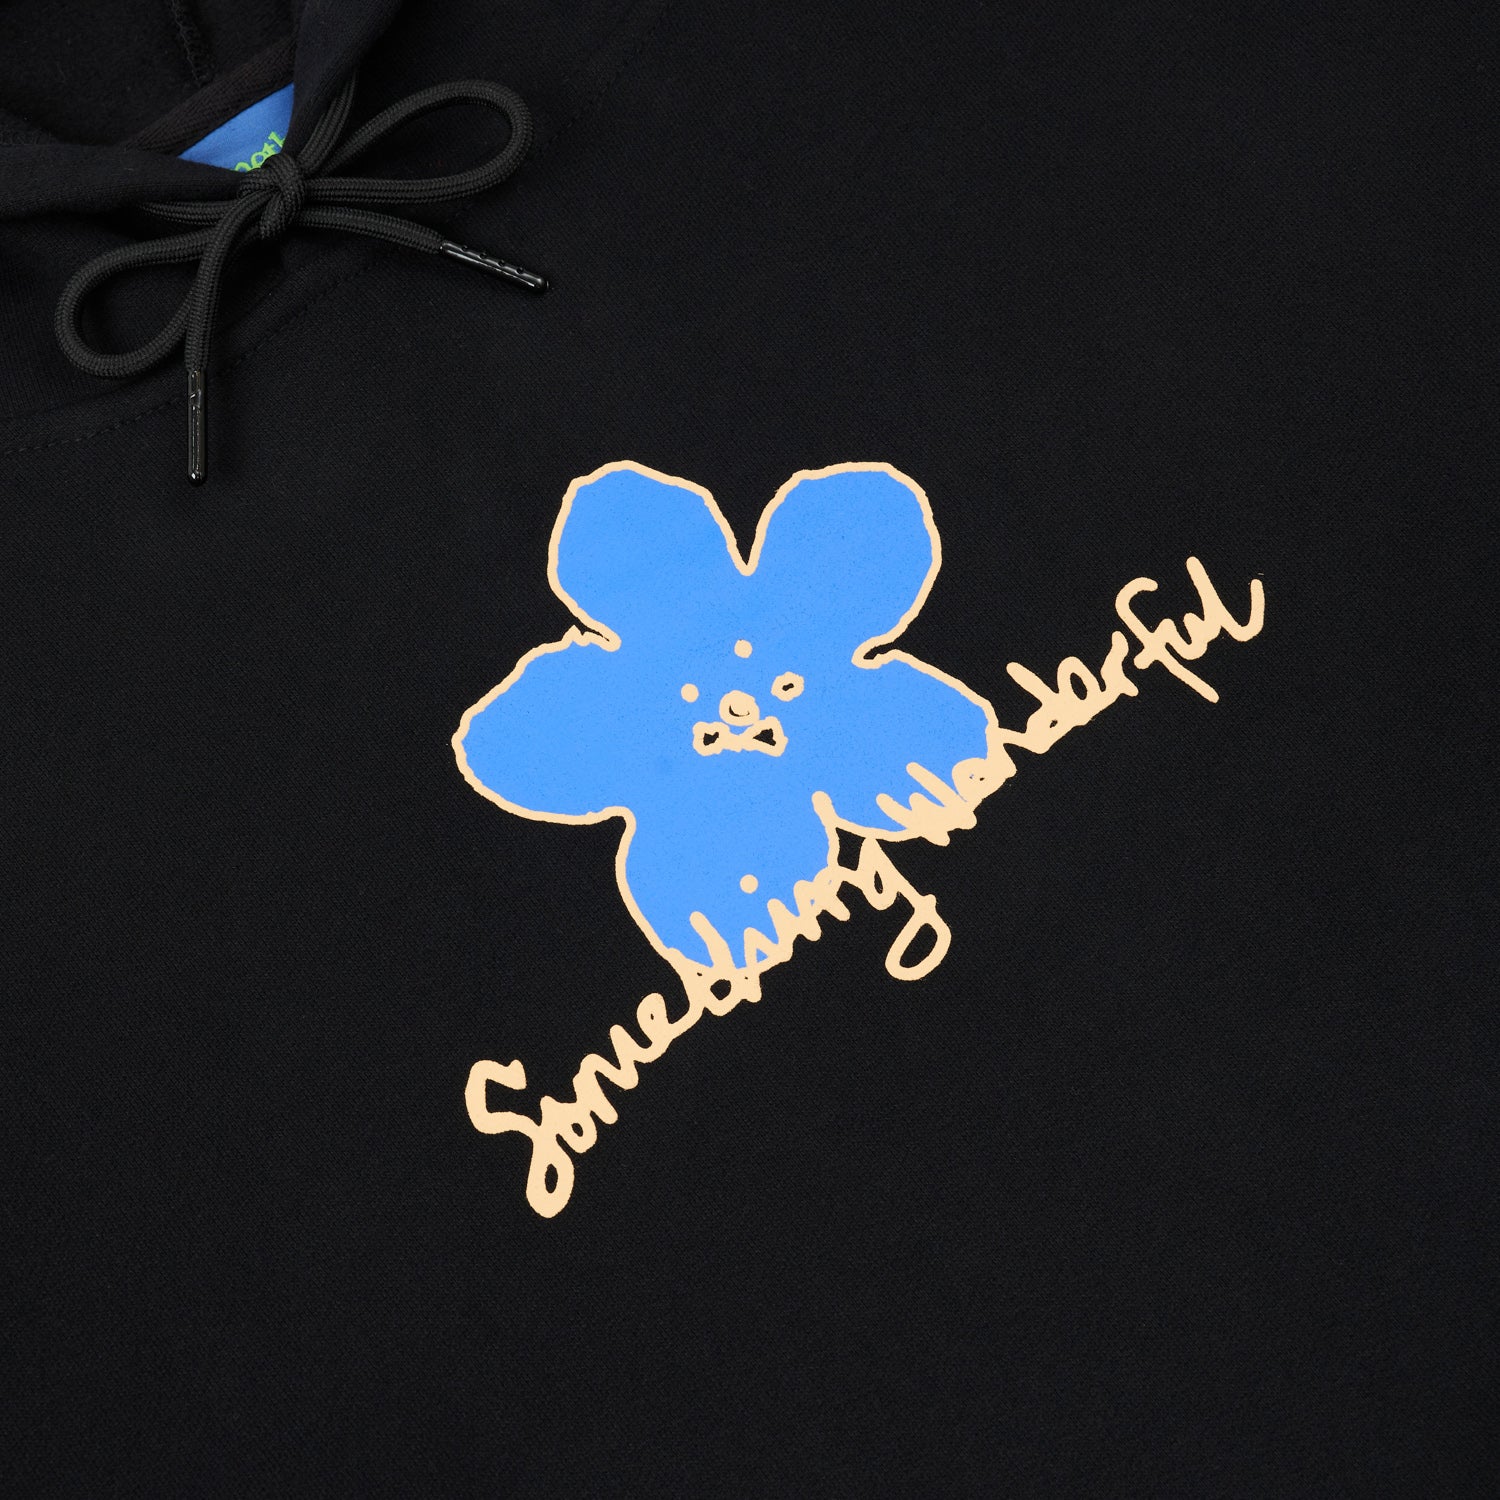 Black hoody with blue and yellow logo